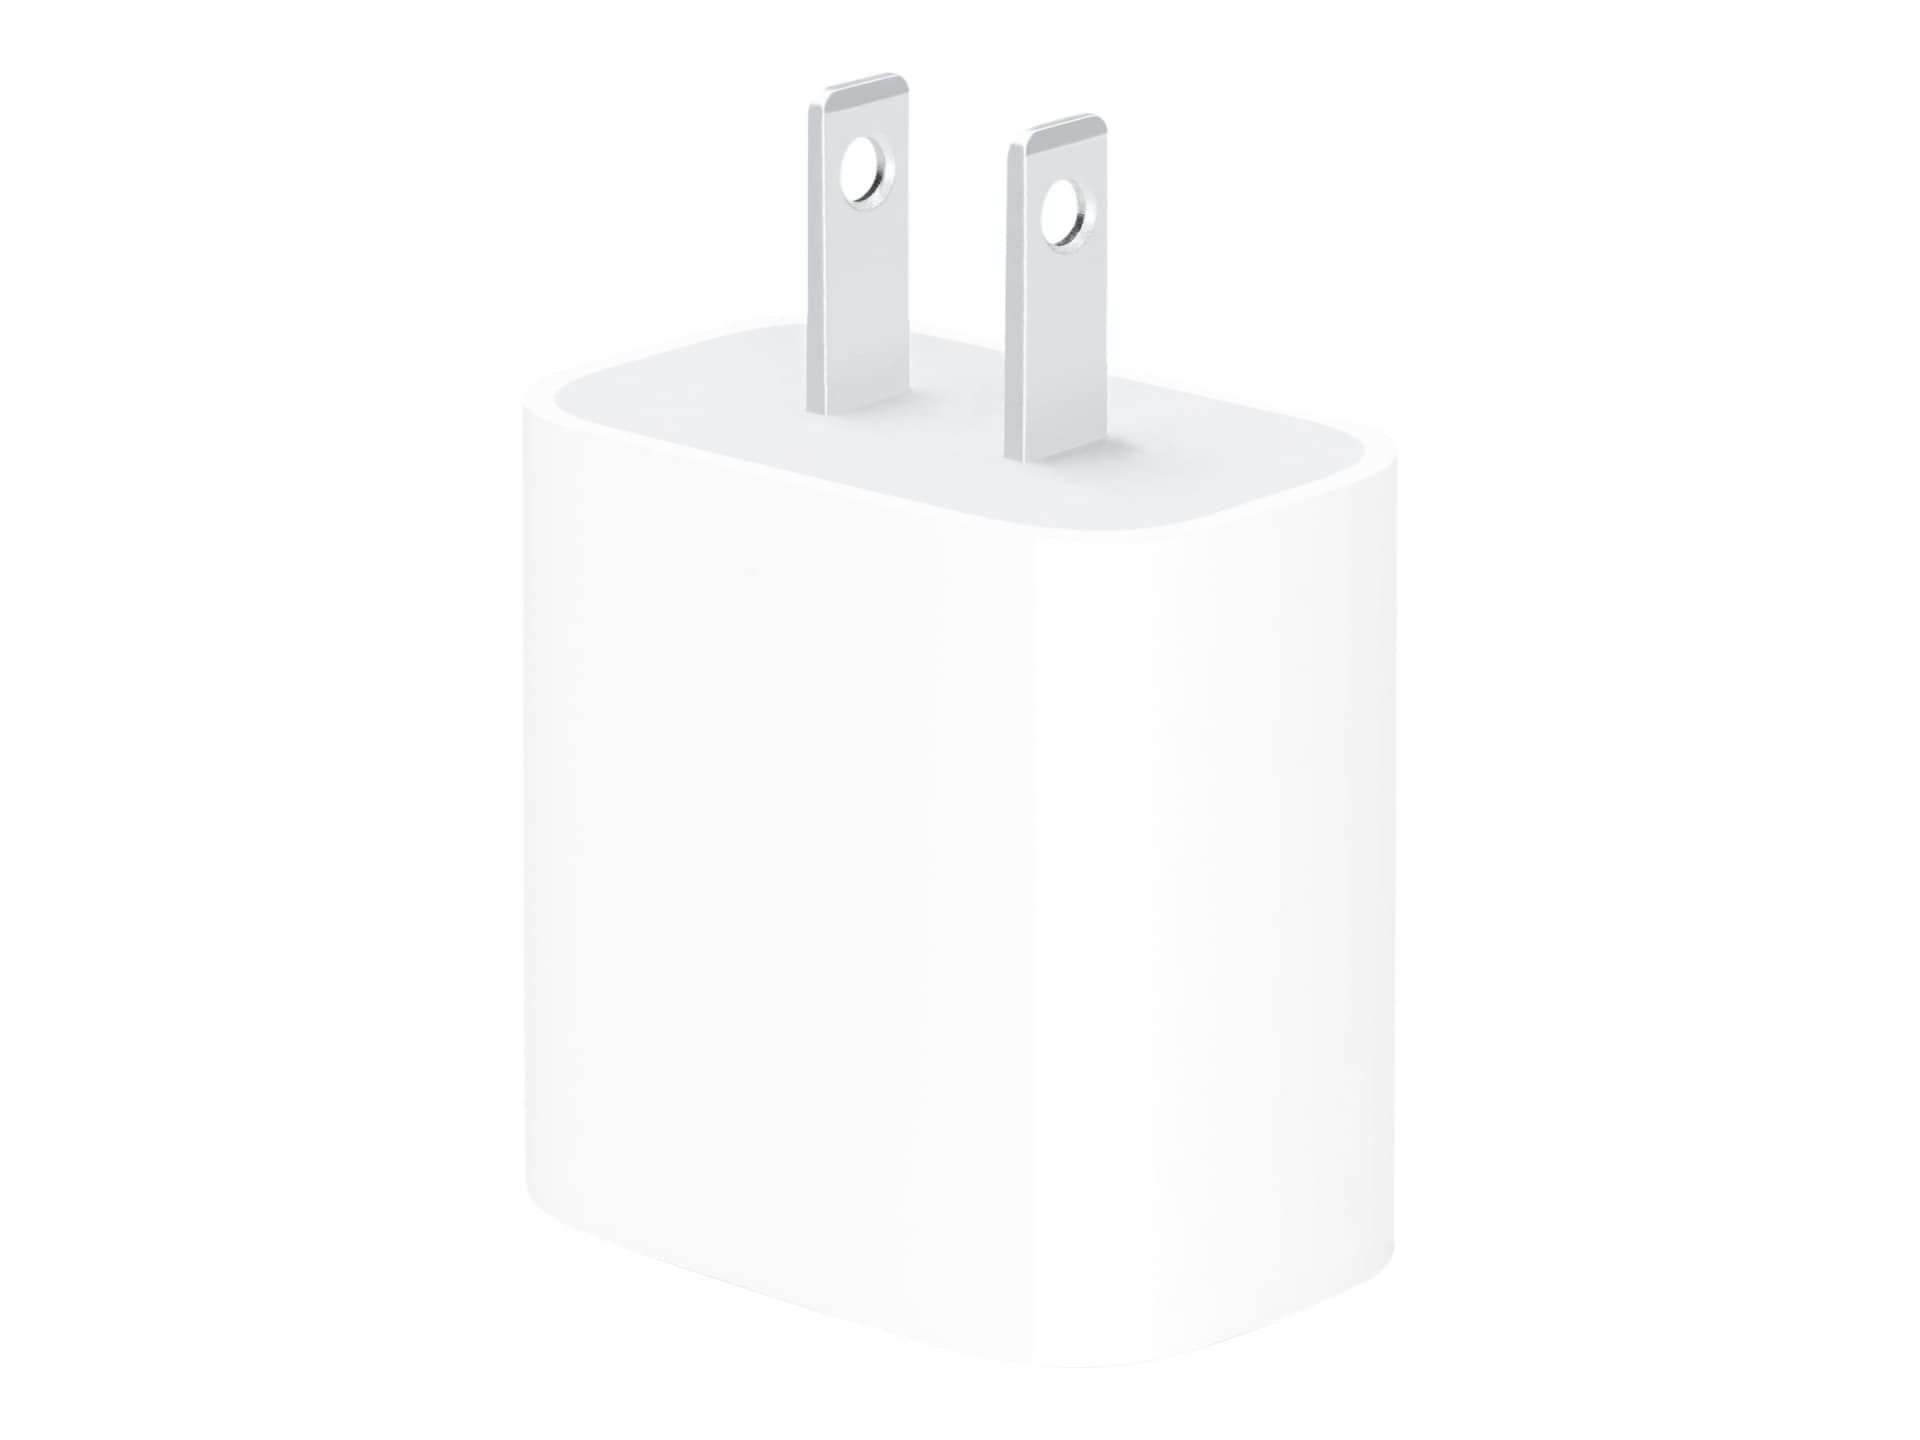 Apple USB-C to USB Adapter - USB-C adapter - USB Type A to 24 pin USB-C -  MJ1M2AM/A - USB Adapters 